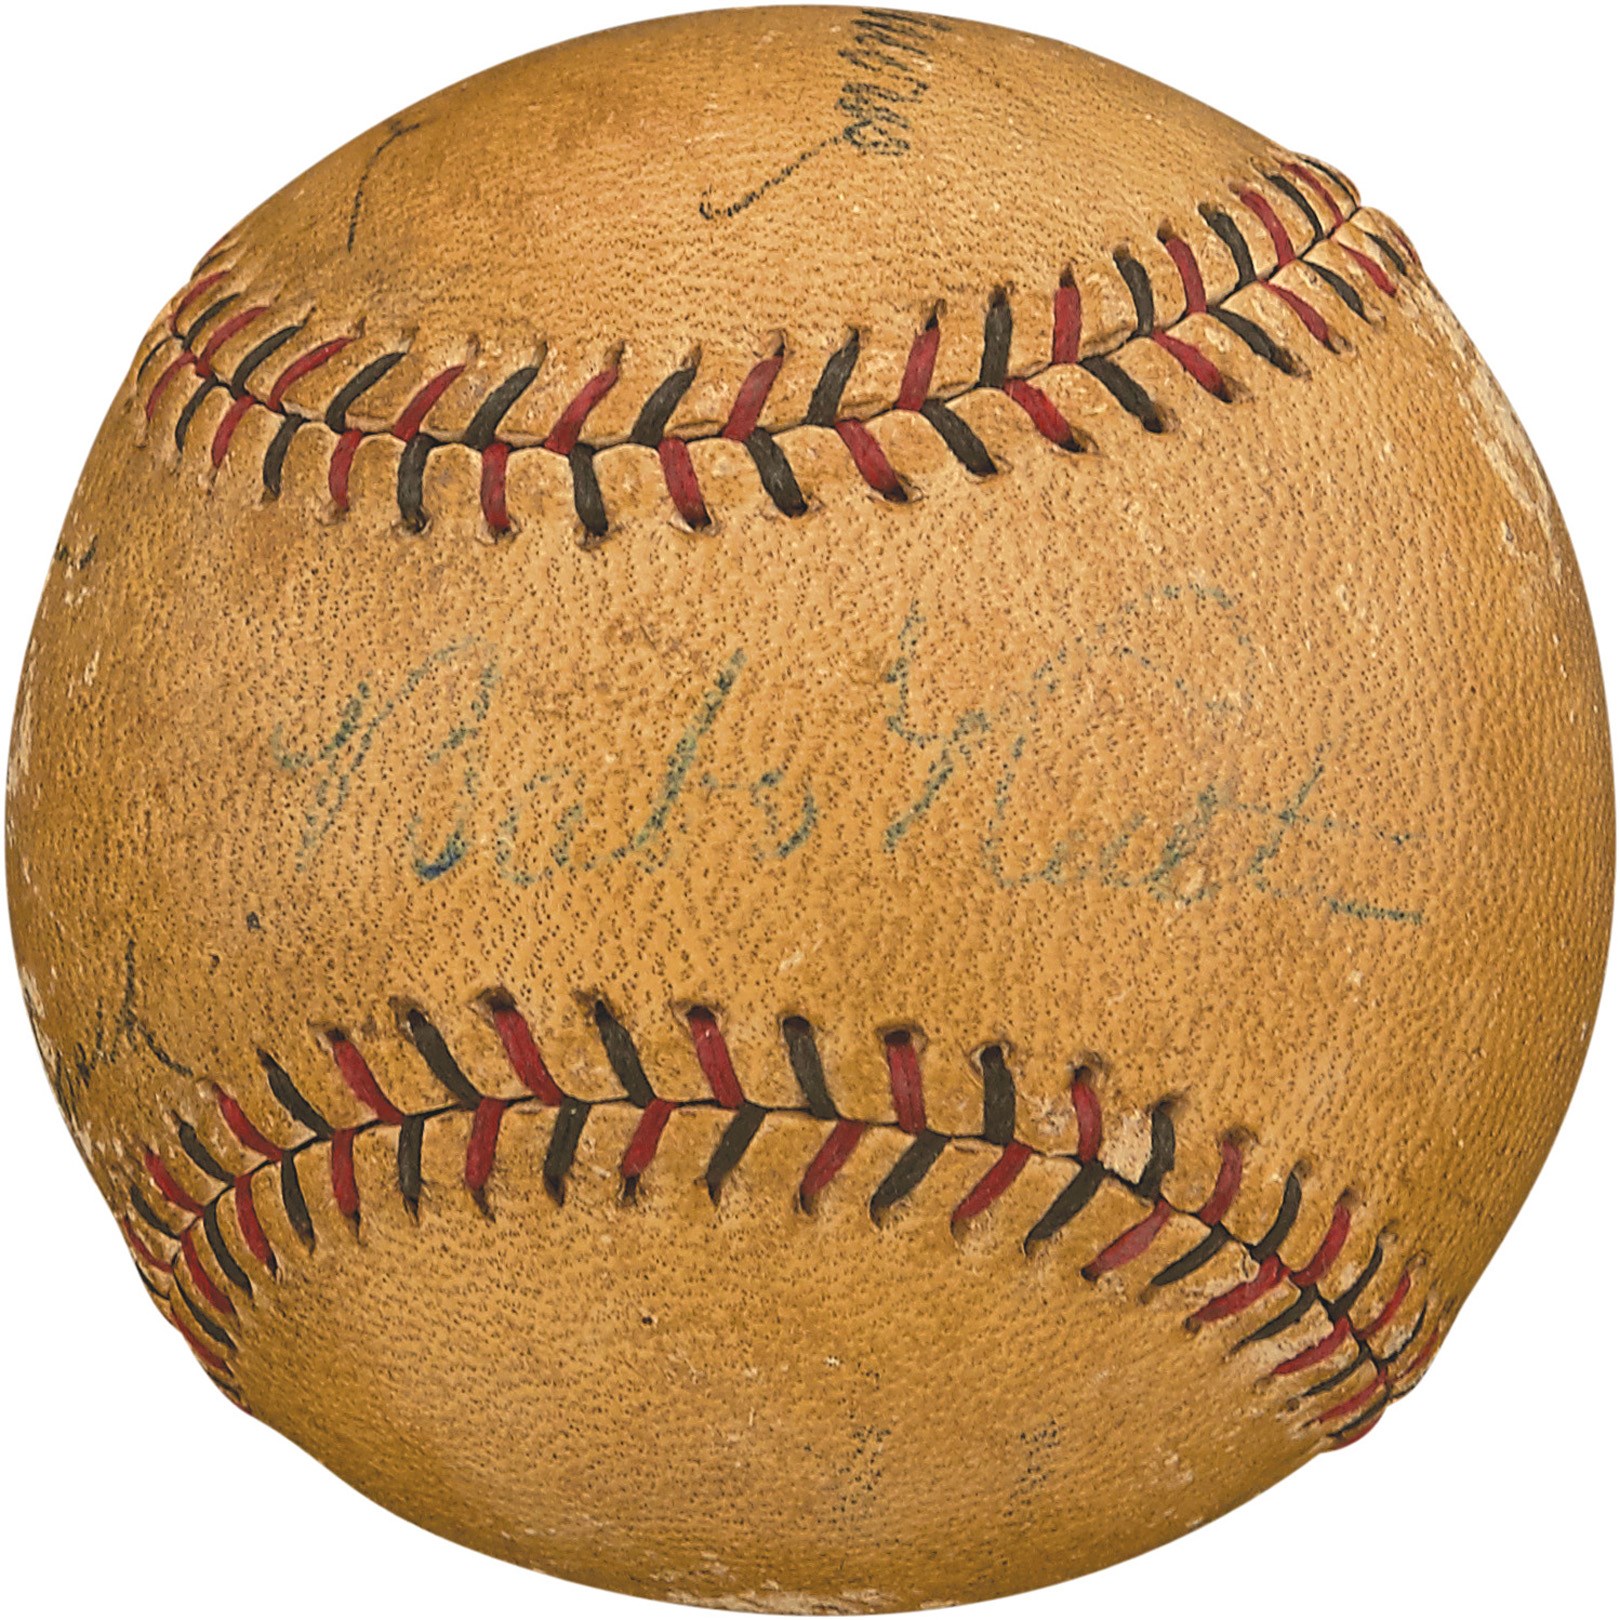 Ruth and Gehrig - Babe Ruth Multi Signed 1930 World Series Game Used Baseball - Direct Family Provenance (PSA)